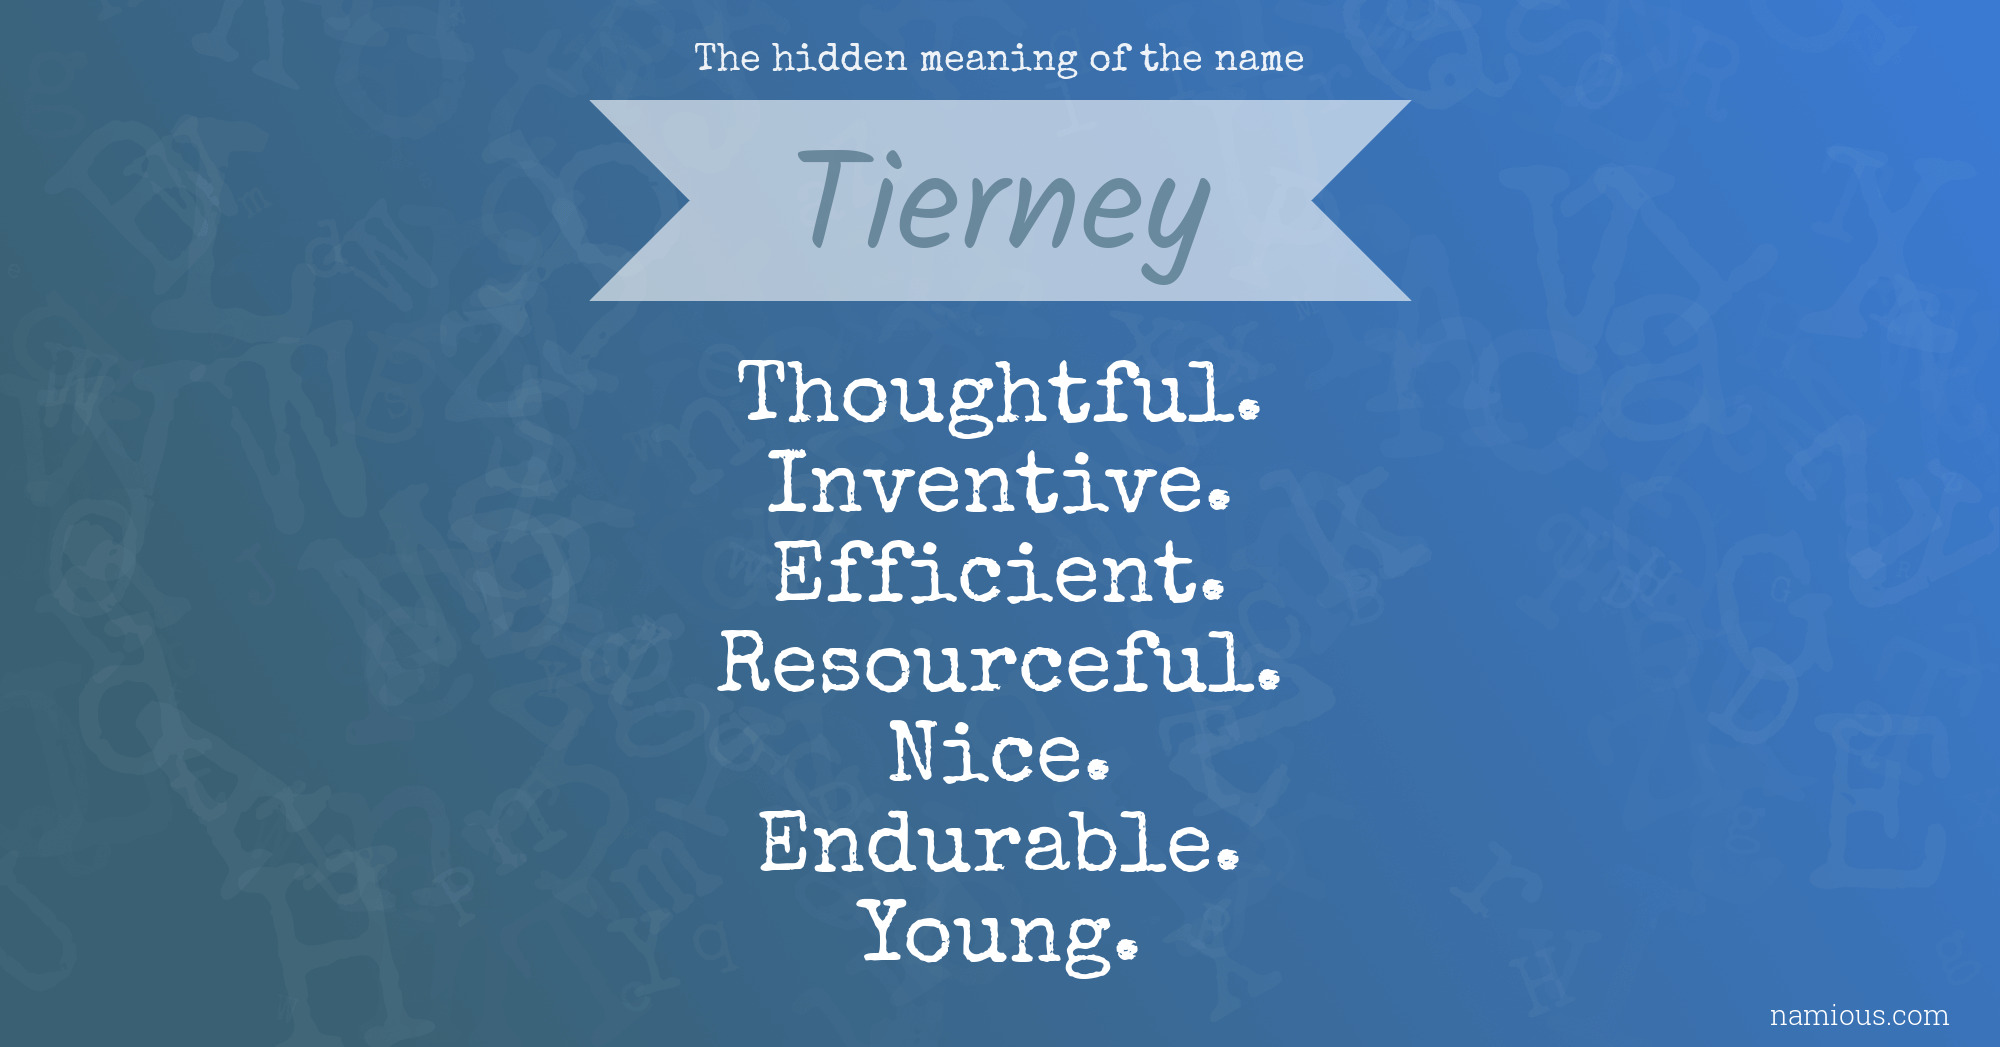 The hidden meaning of the name Tierney